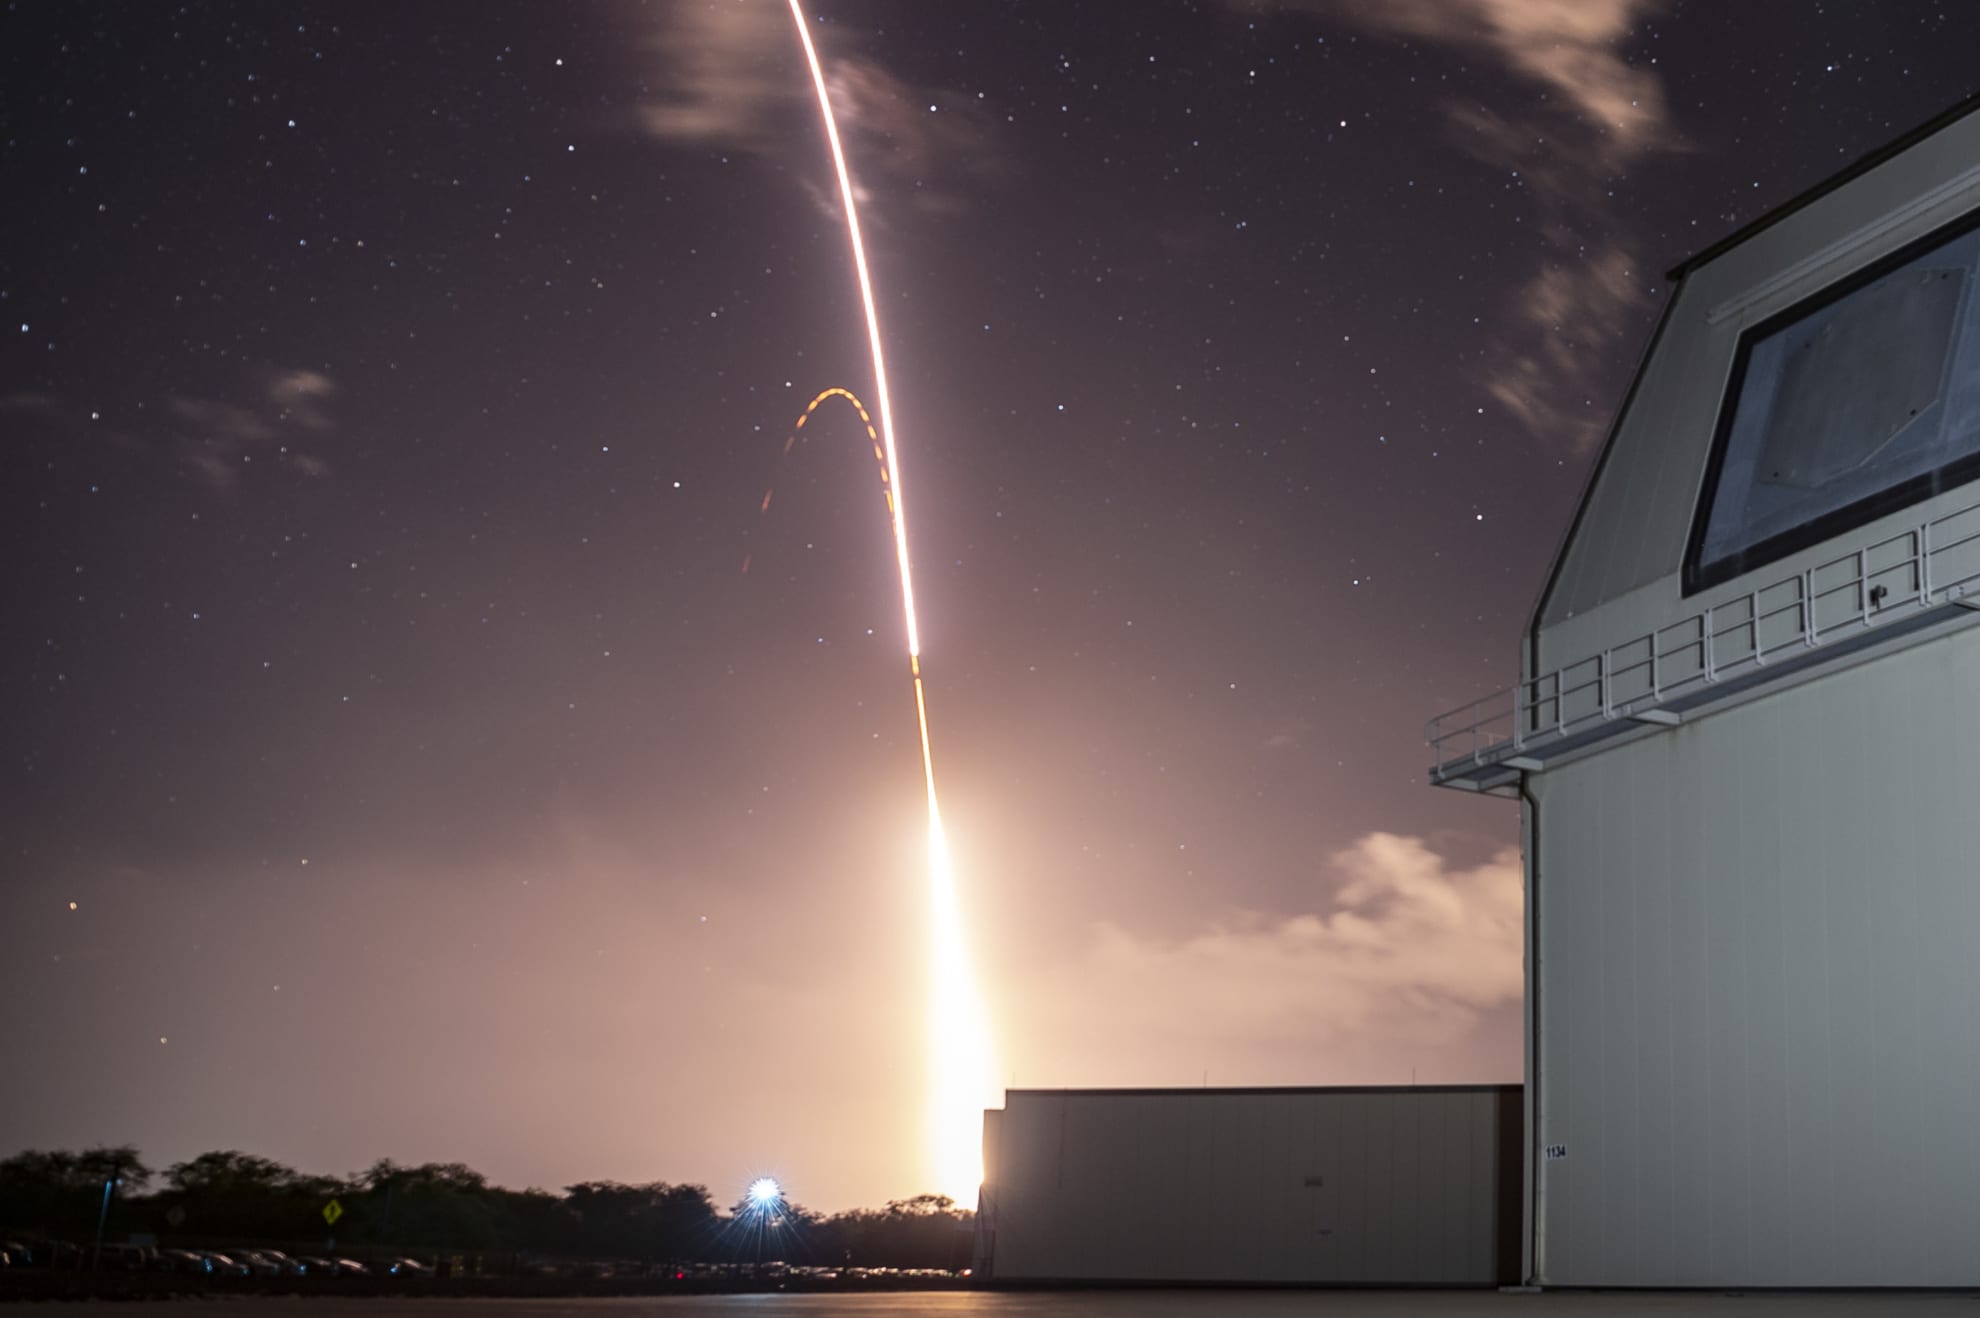 A Standard Missile (SM) 3 Block IIA launched from the Aegis Ashore Missile Defense Test Complex at the Pacific Missile Range Facility at Kauai, Hawaii, Dec. 10, 2018, to successfully intercept an intermediate-range ballistic missile target in space. (U.S. Army photo/Released)